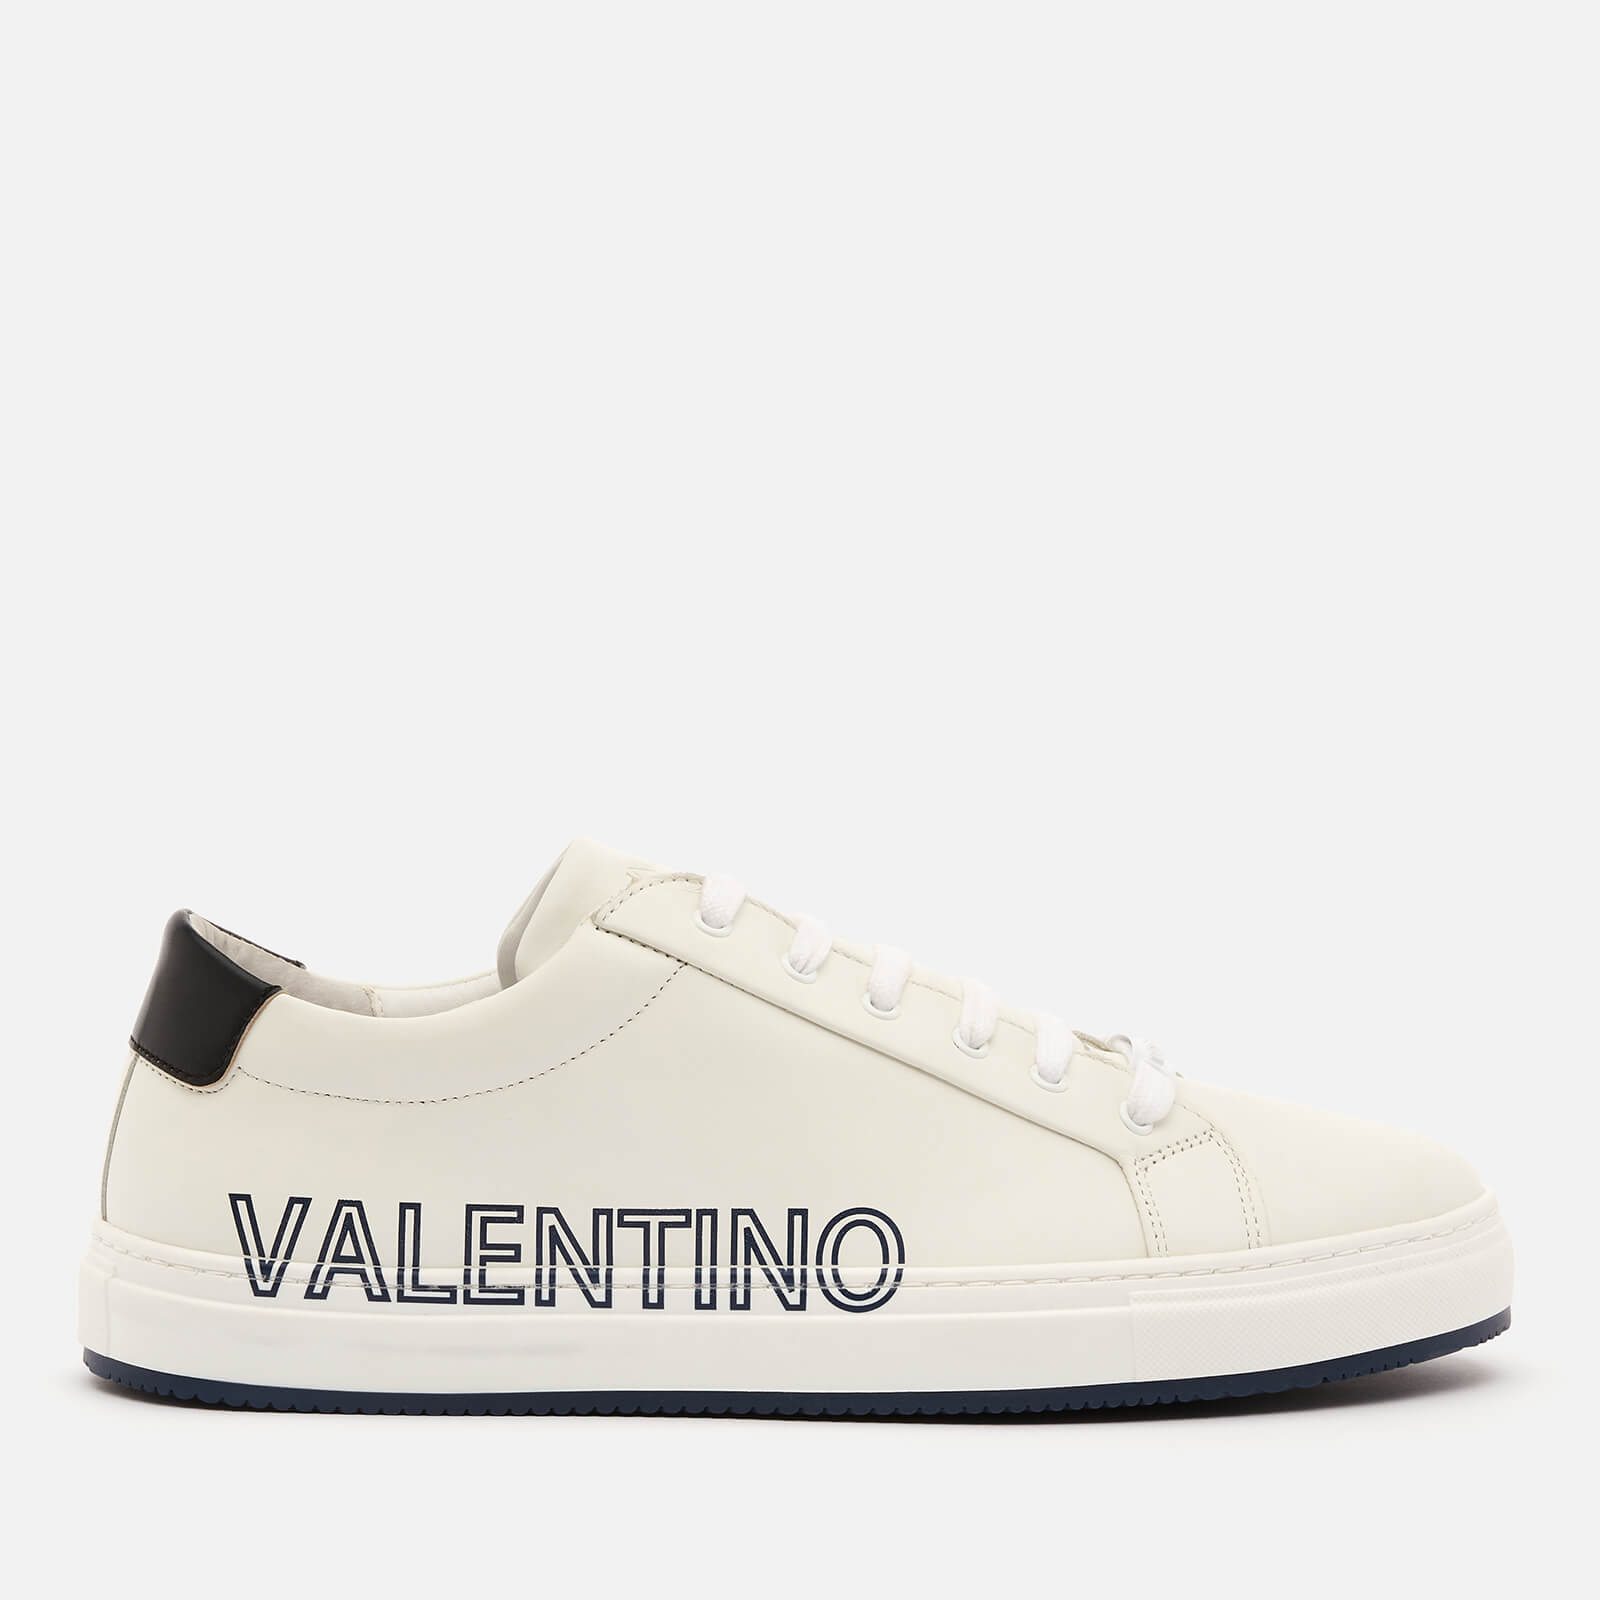 Valentino Shoes Men's Leather Low Top Trainers - White/Blue - UK 7